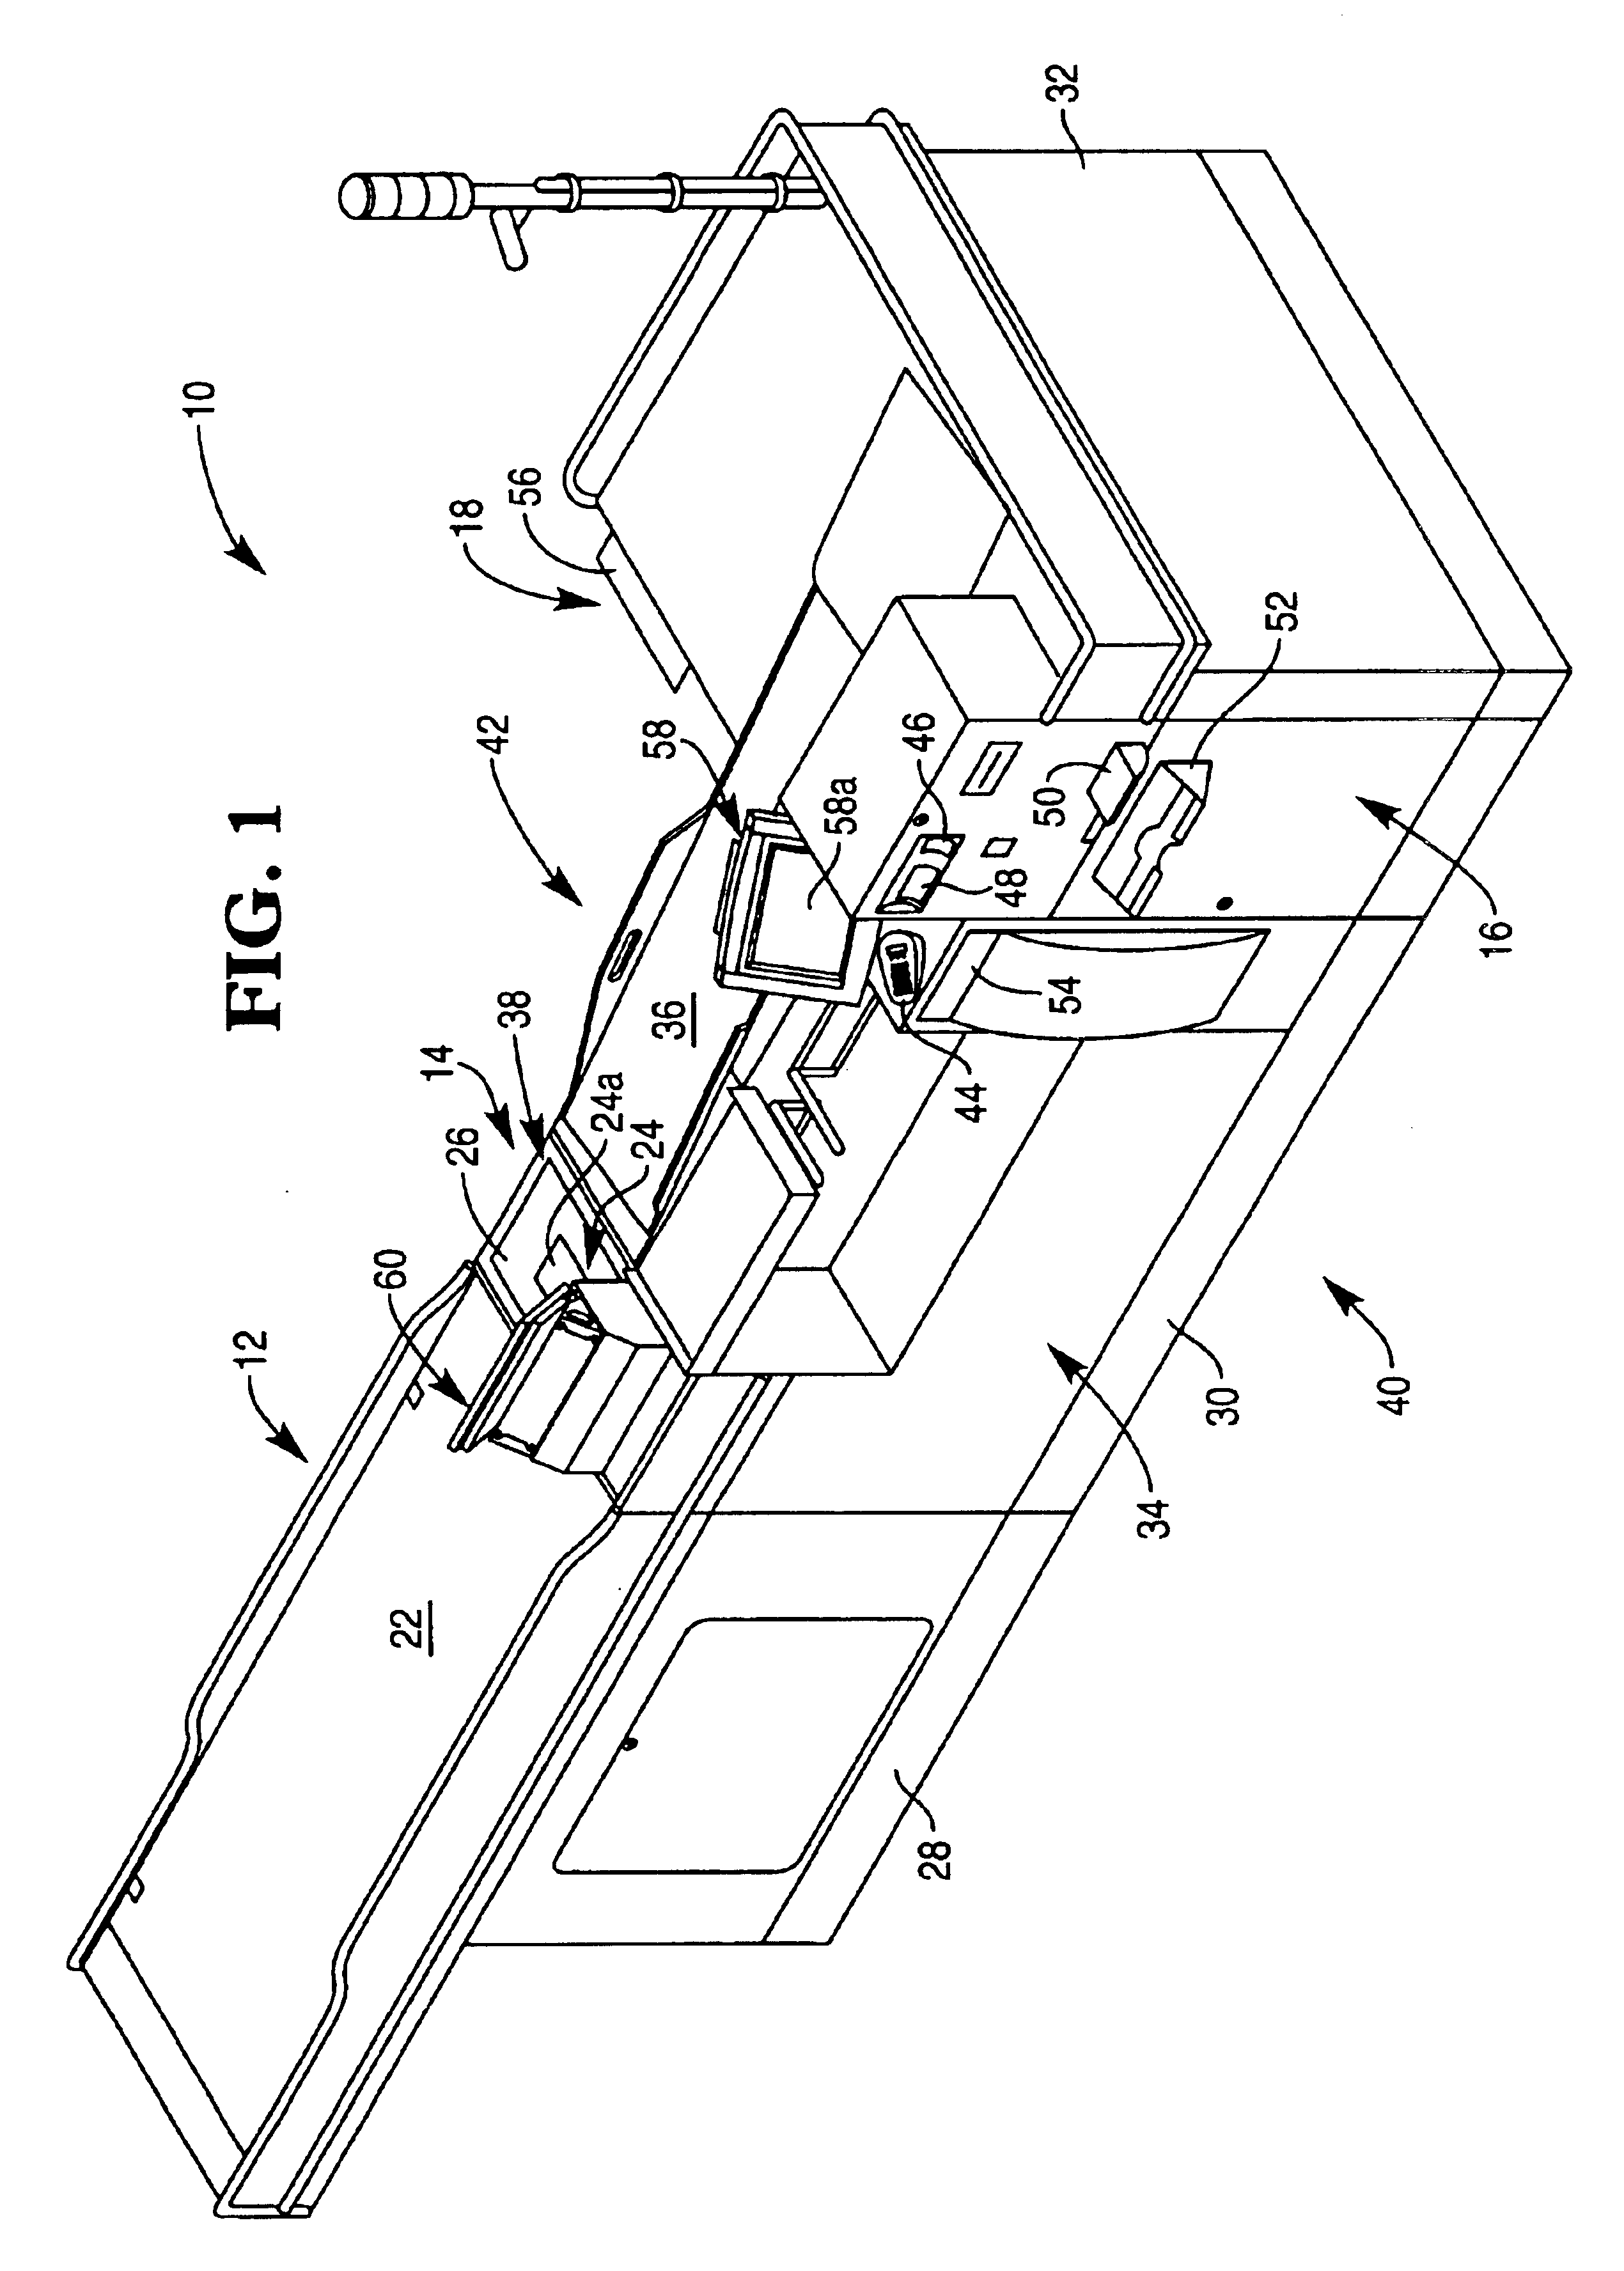 Apparatus and method for utilizing an existing software application during operation of a convertible checkout terminal